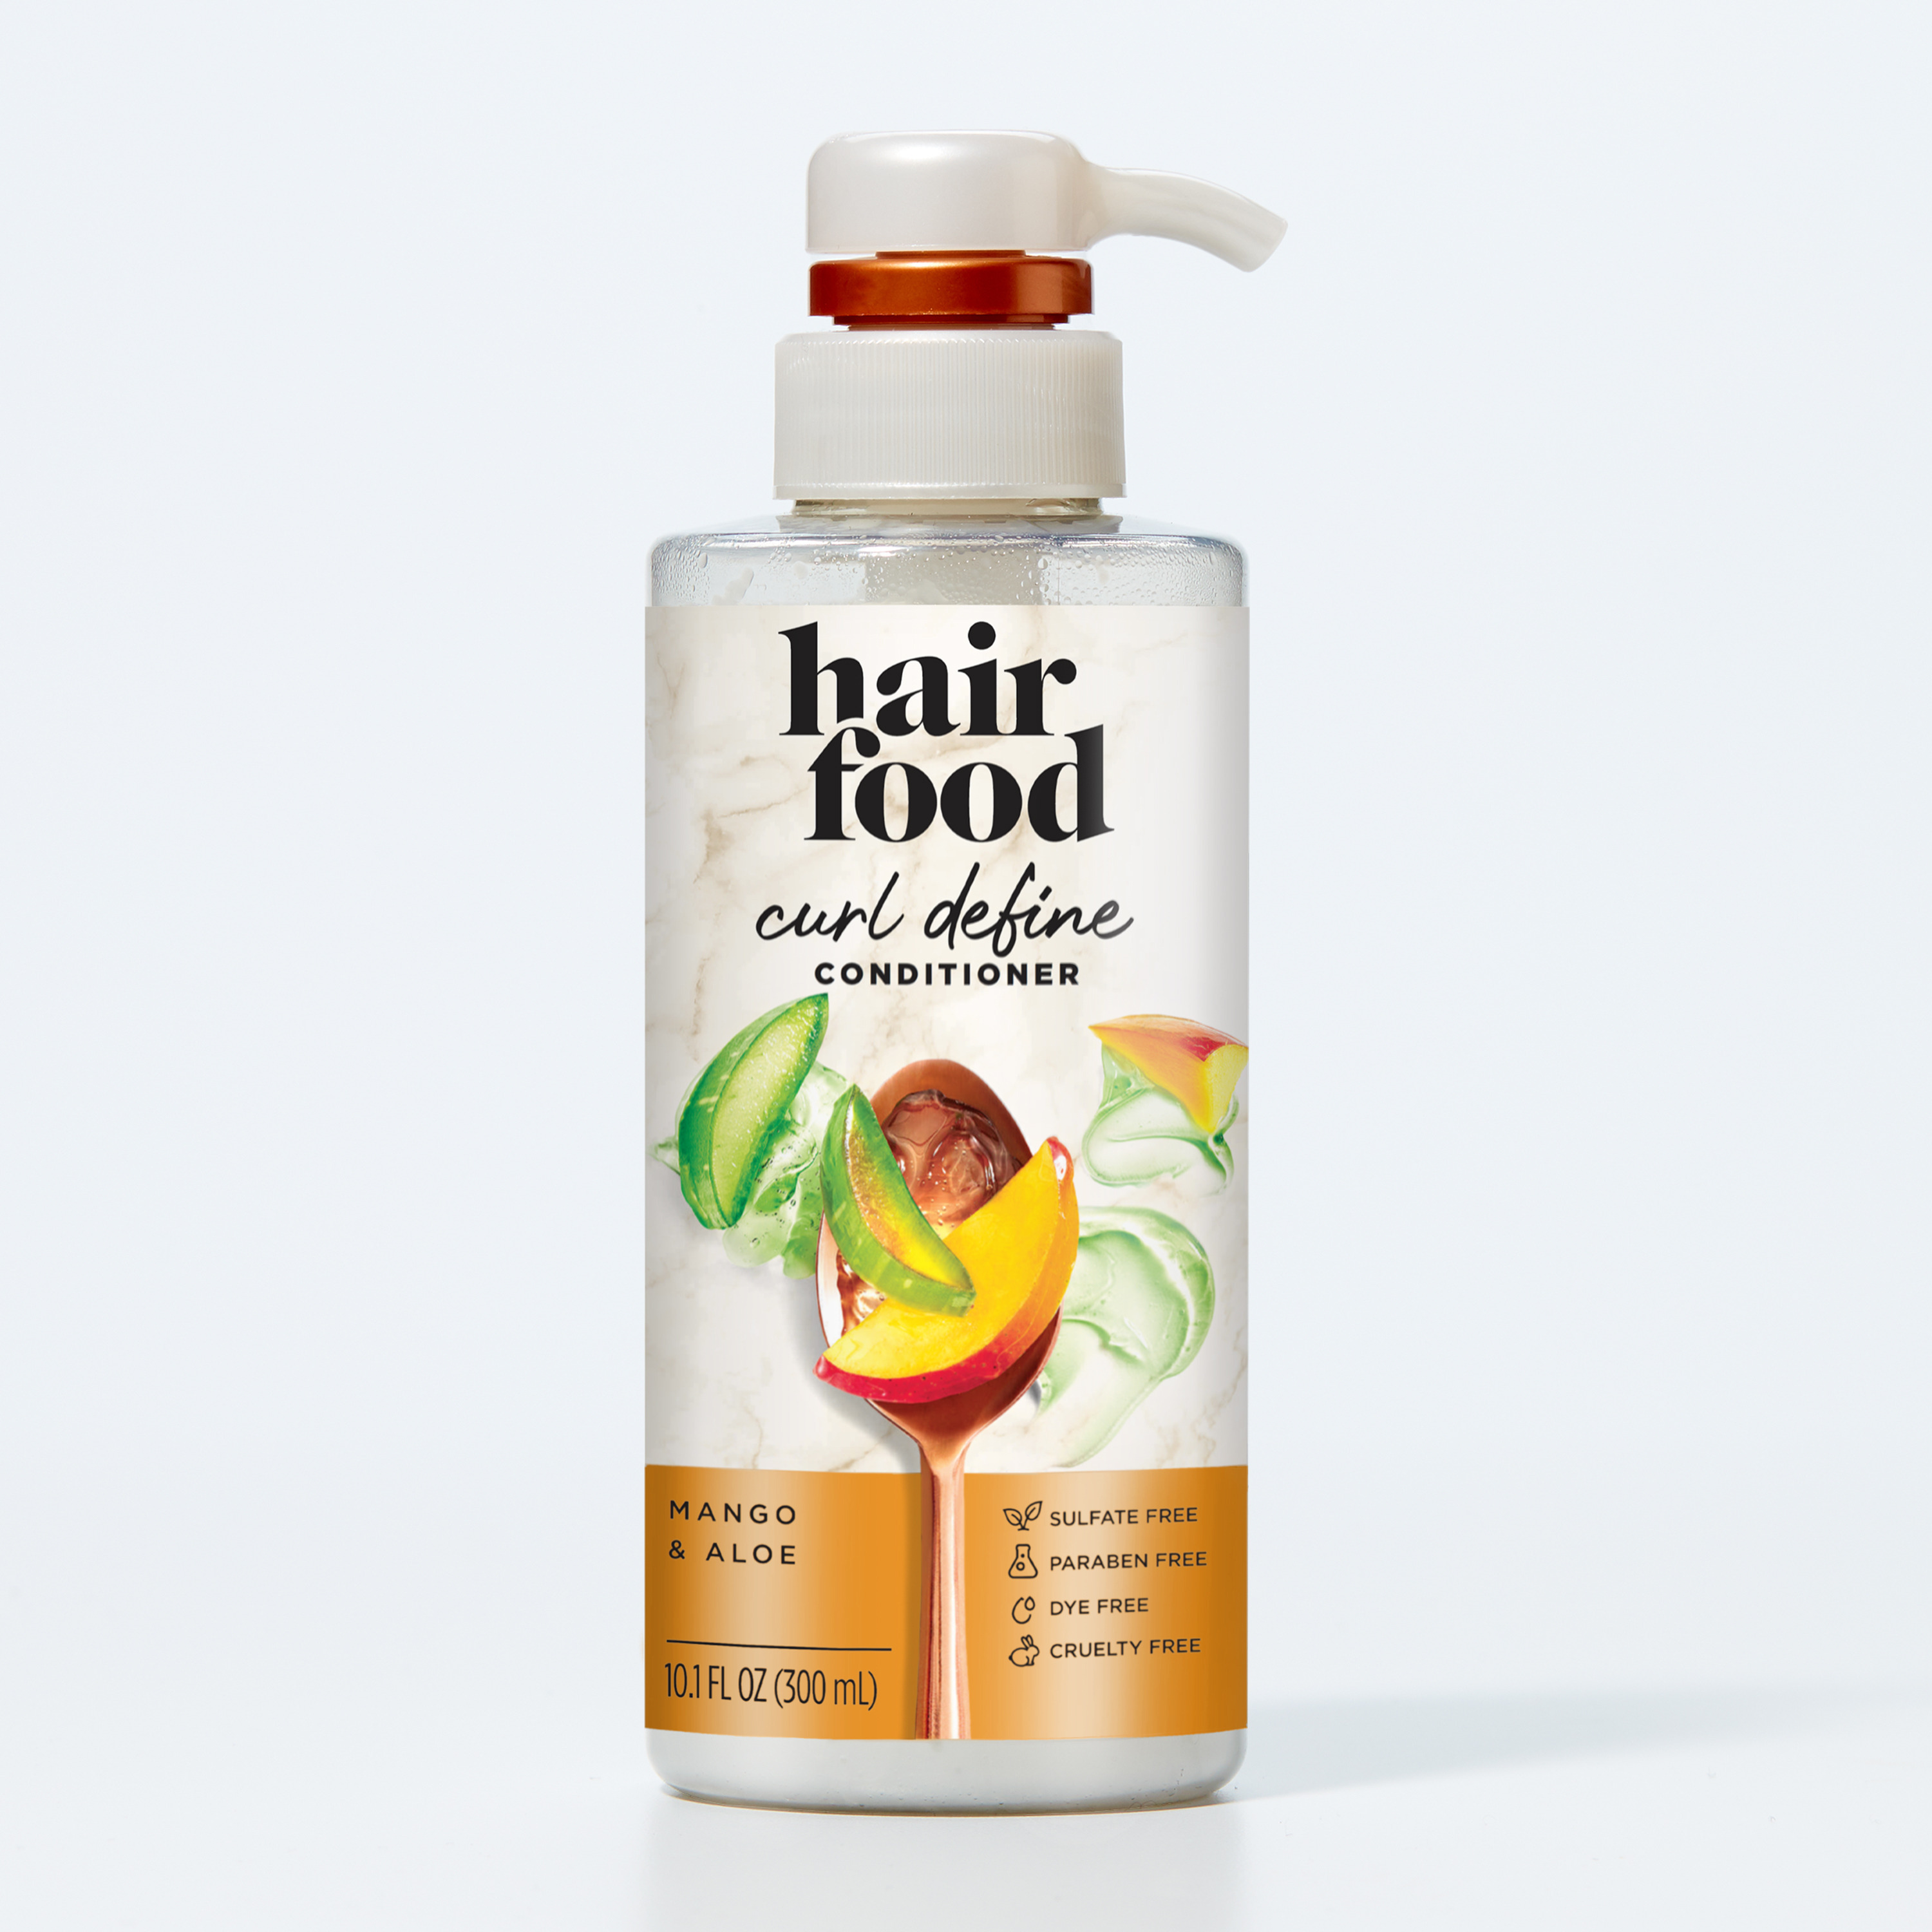 Hair Food Mango & Aloe Curl Definition Conditioner, for Curly Hair, 10.1 fl oz - image 2 of 11